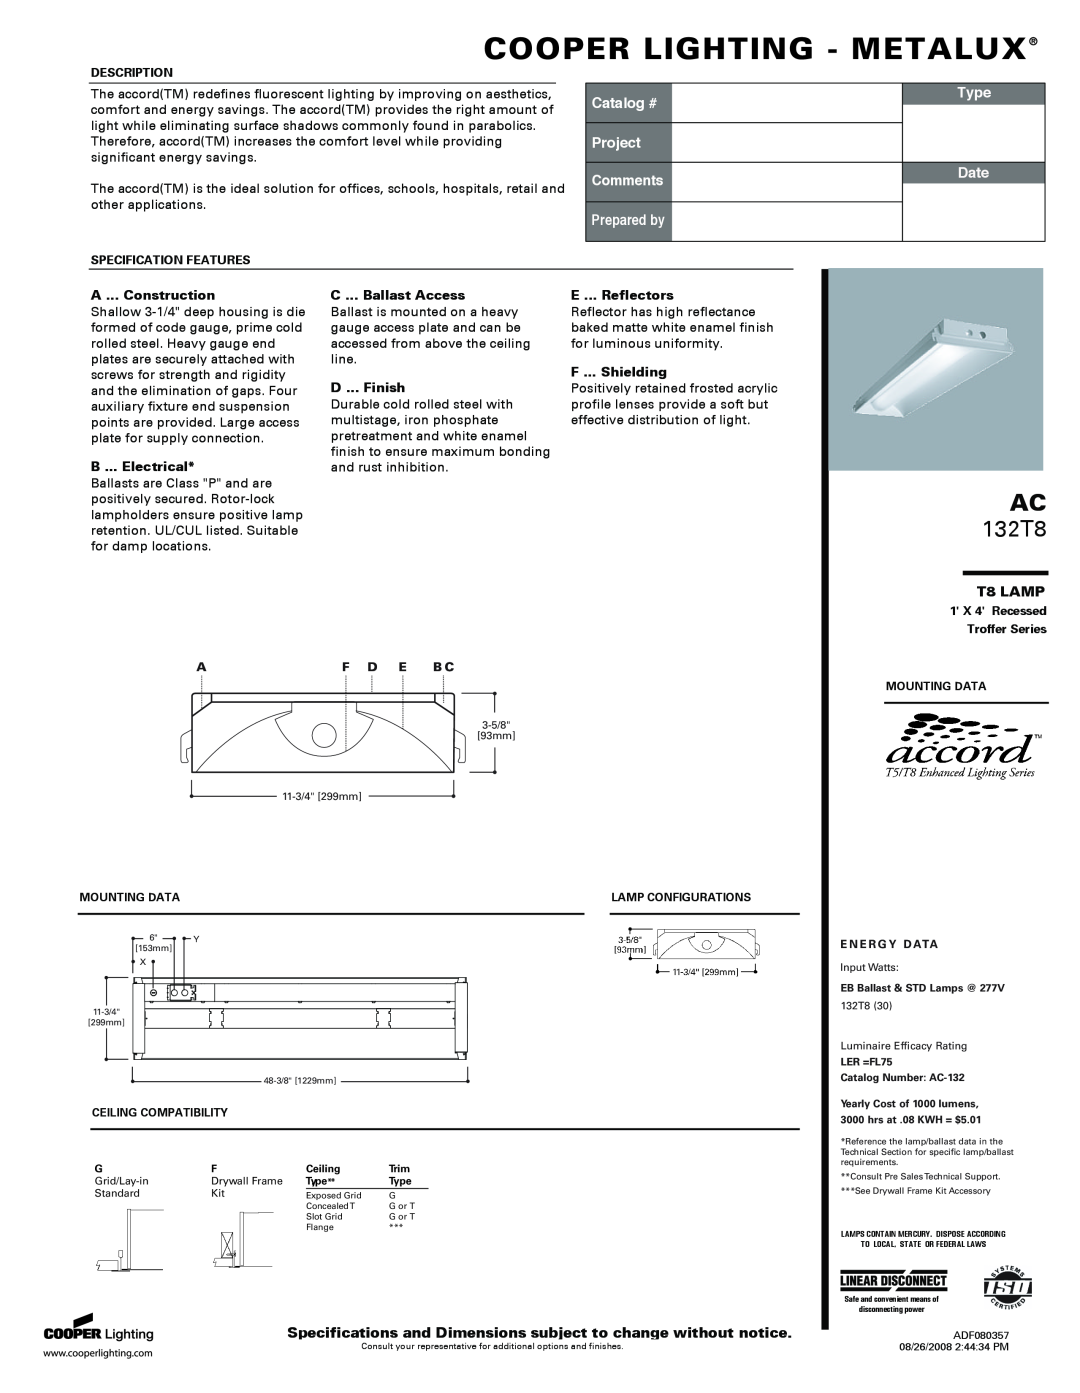 Cooper Lighting 132T8 specifications T8 LAMP, Cooper Lighting - Metalux, Catalog #, Project Comments, Prepared by, Type 